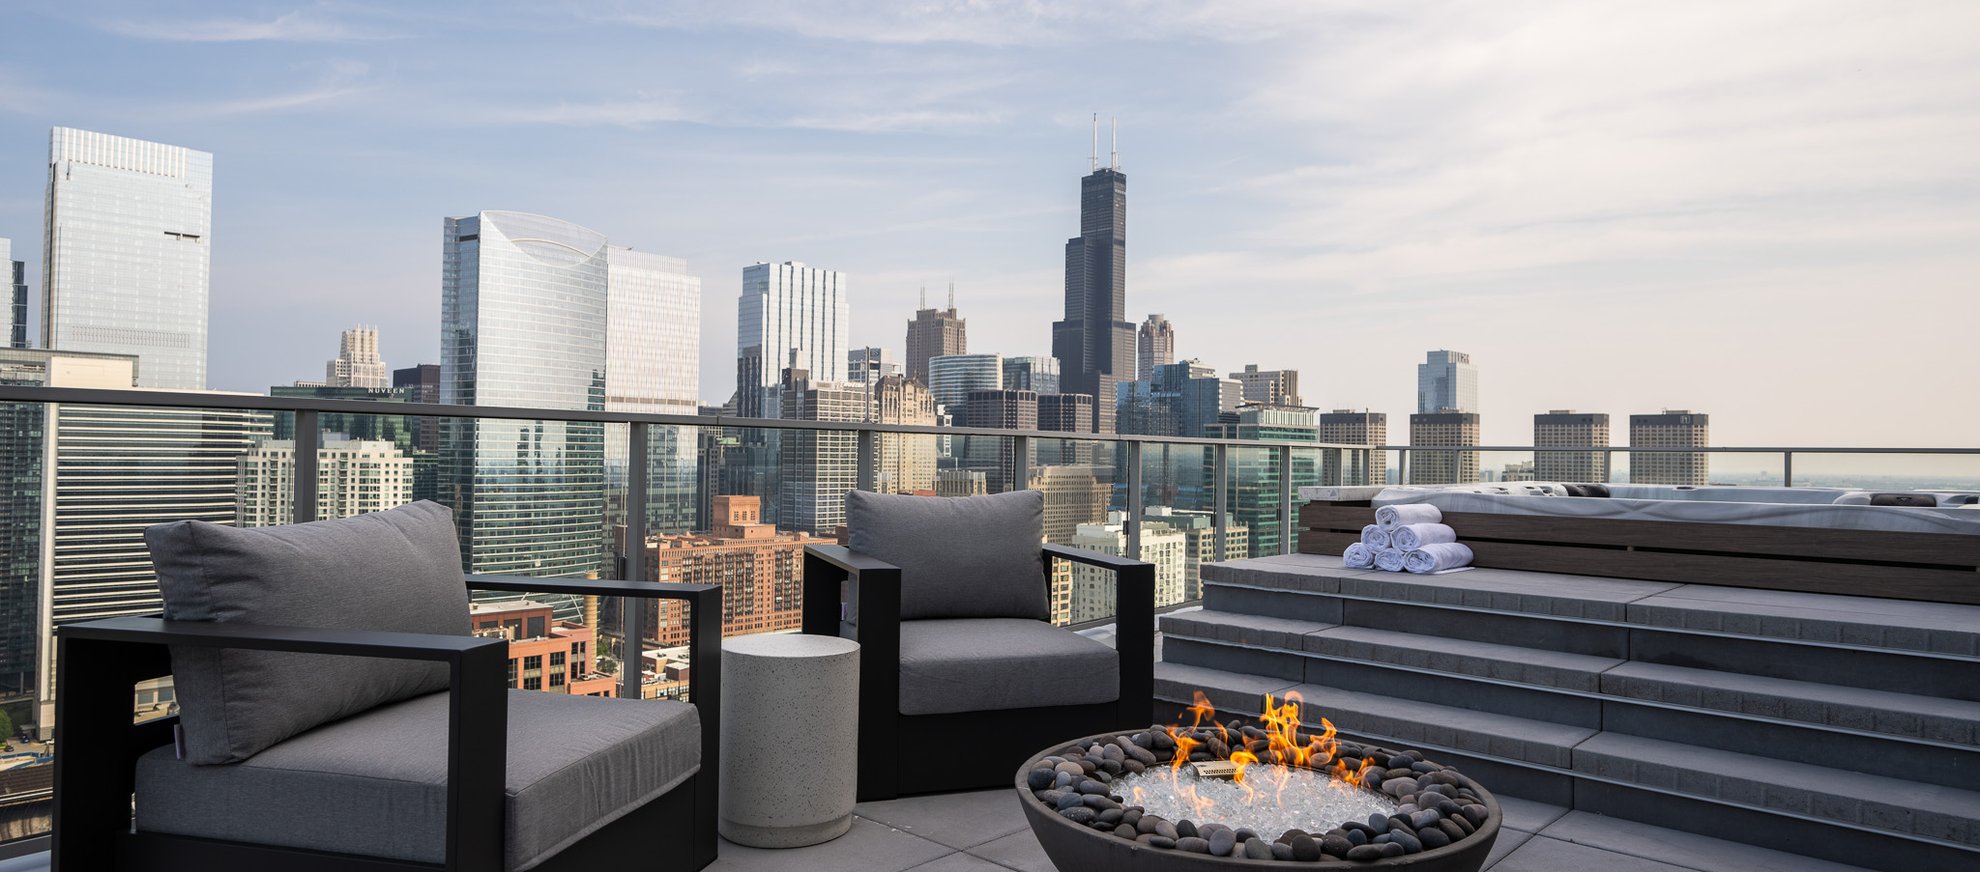 outdoor fire place and hot tub at the penthouse level chicago fulton market looking over chicago city view